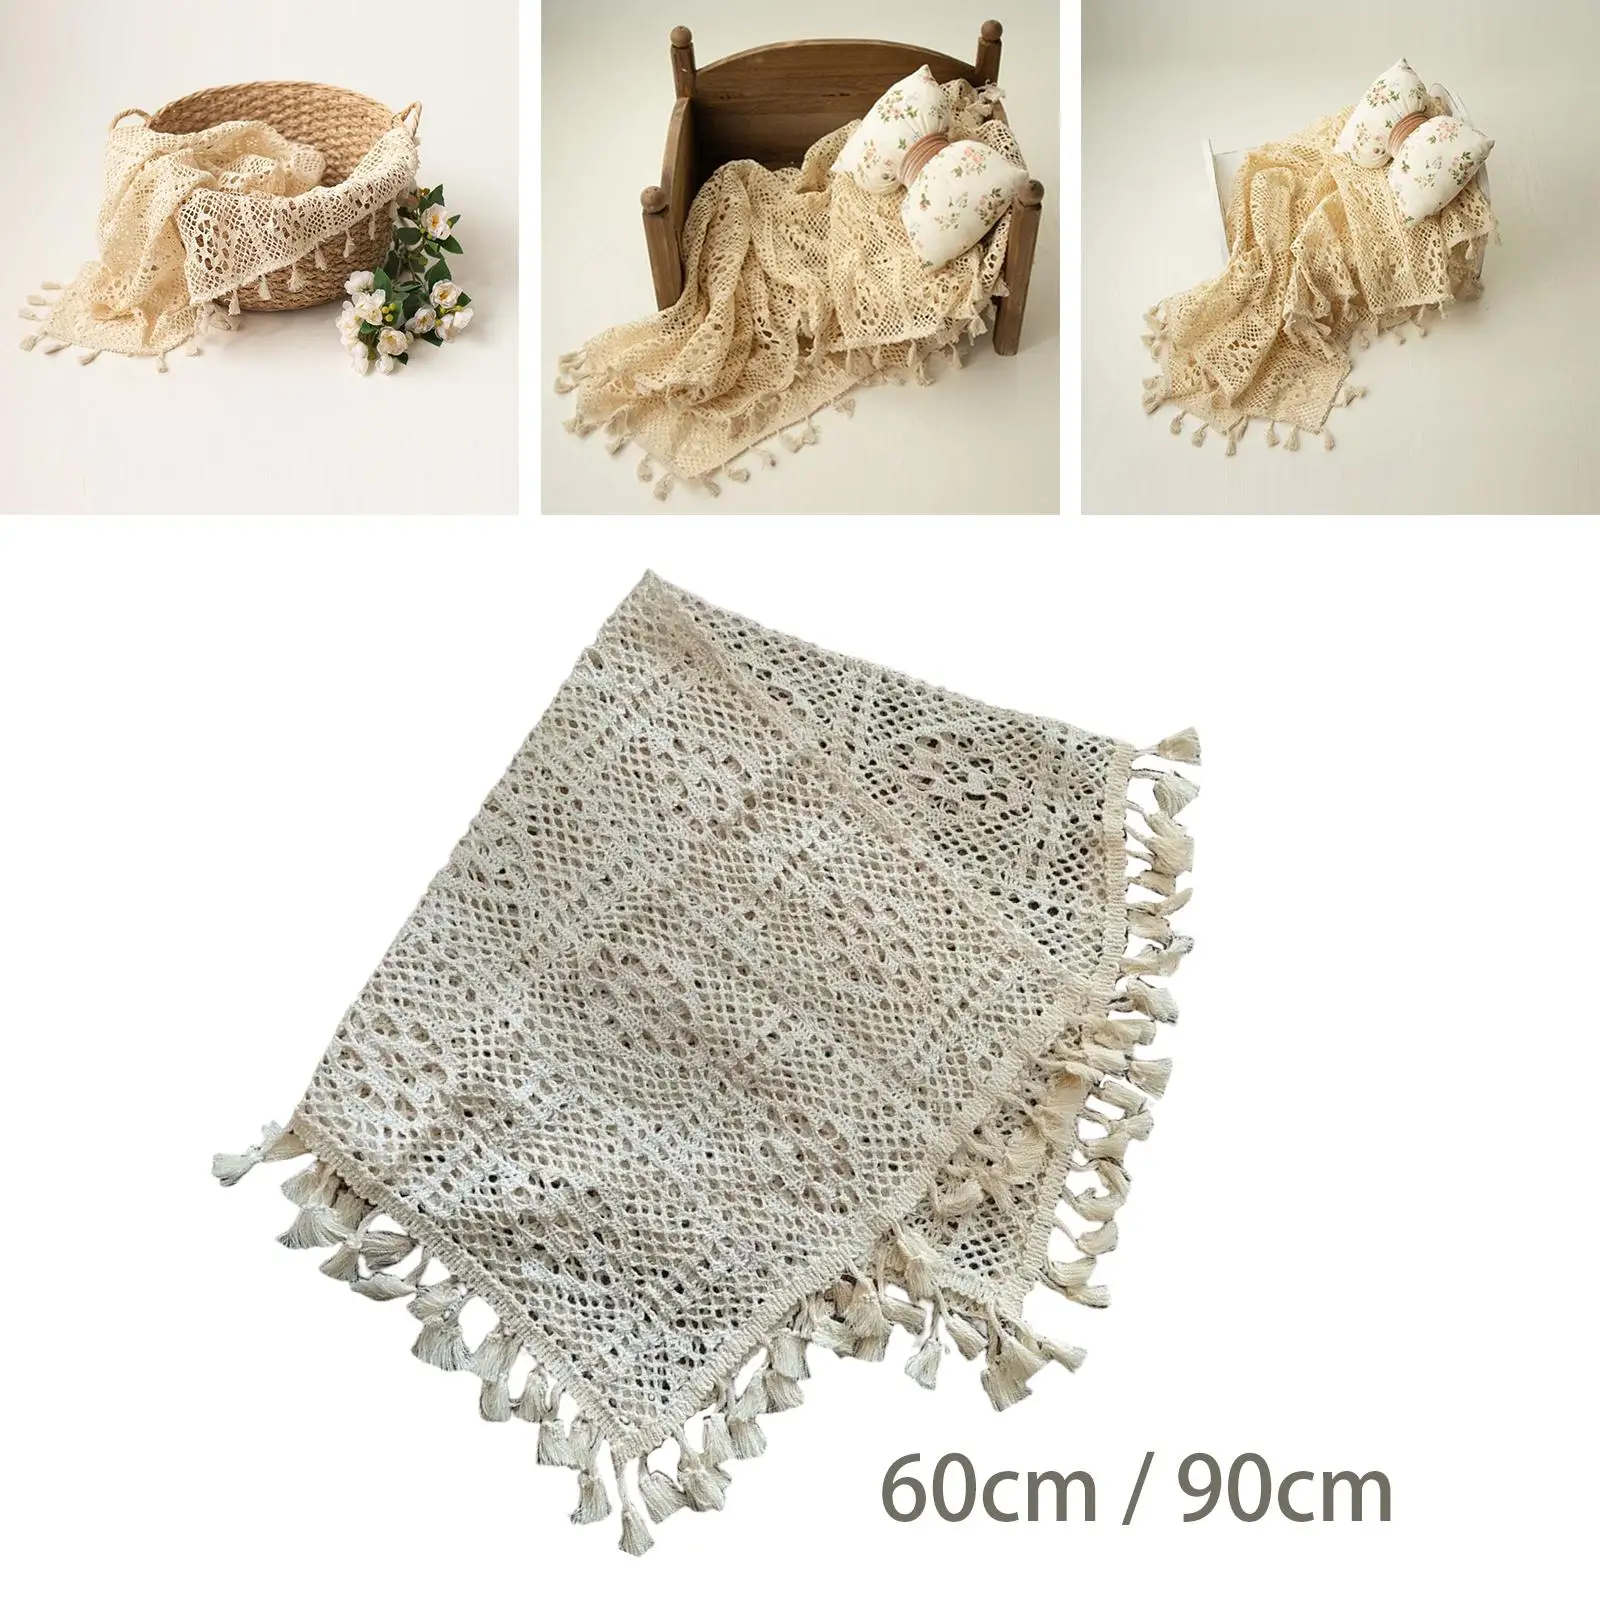 Hollow Weaving Photography Prop Blanket Soft Cotton Ornament Decorative Lightweight Photo Shooting Wrapping Towel Tassel Blanket